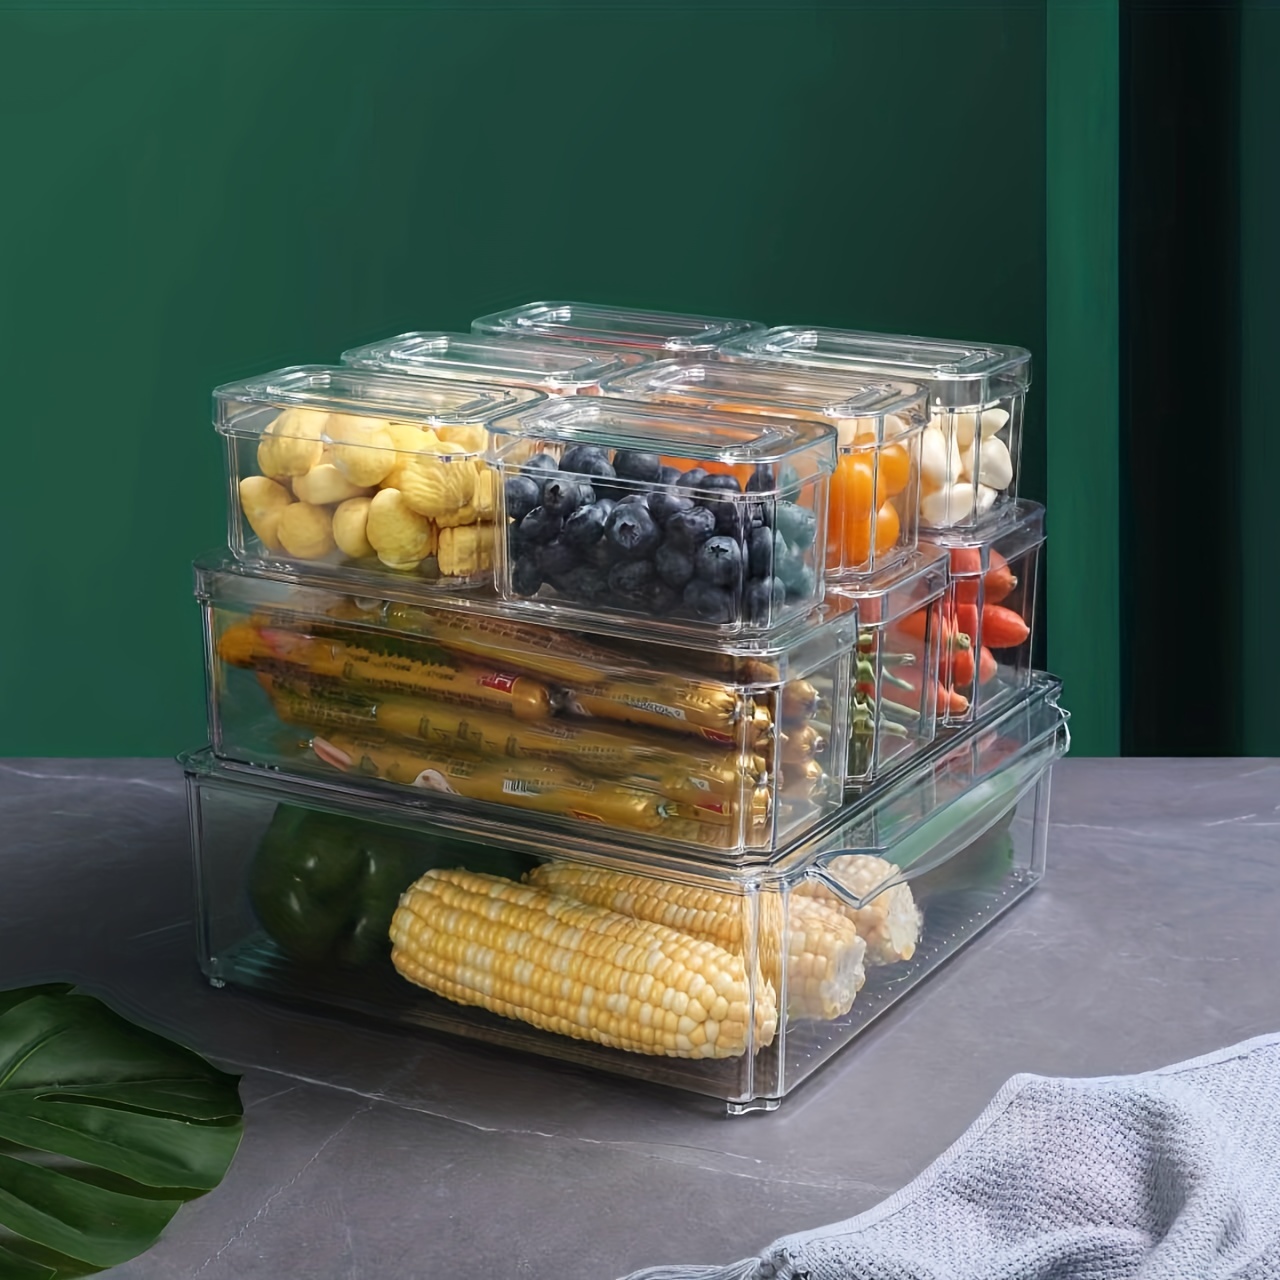 Crisp Stackable Refrigerator and Pantry Produce Food Storage Container